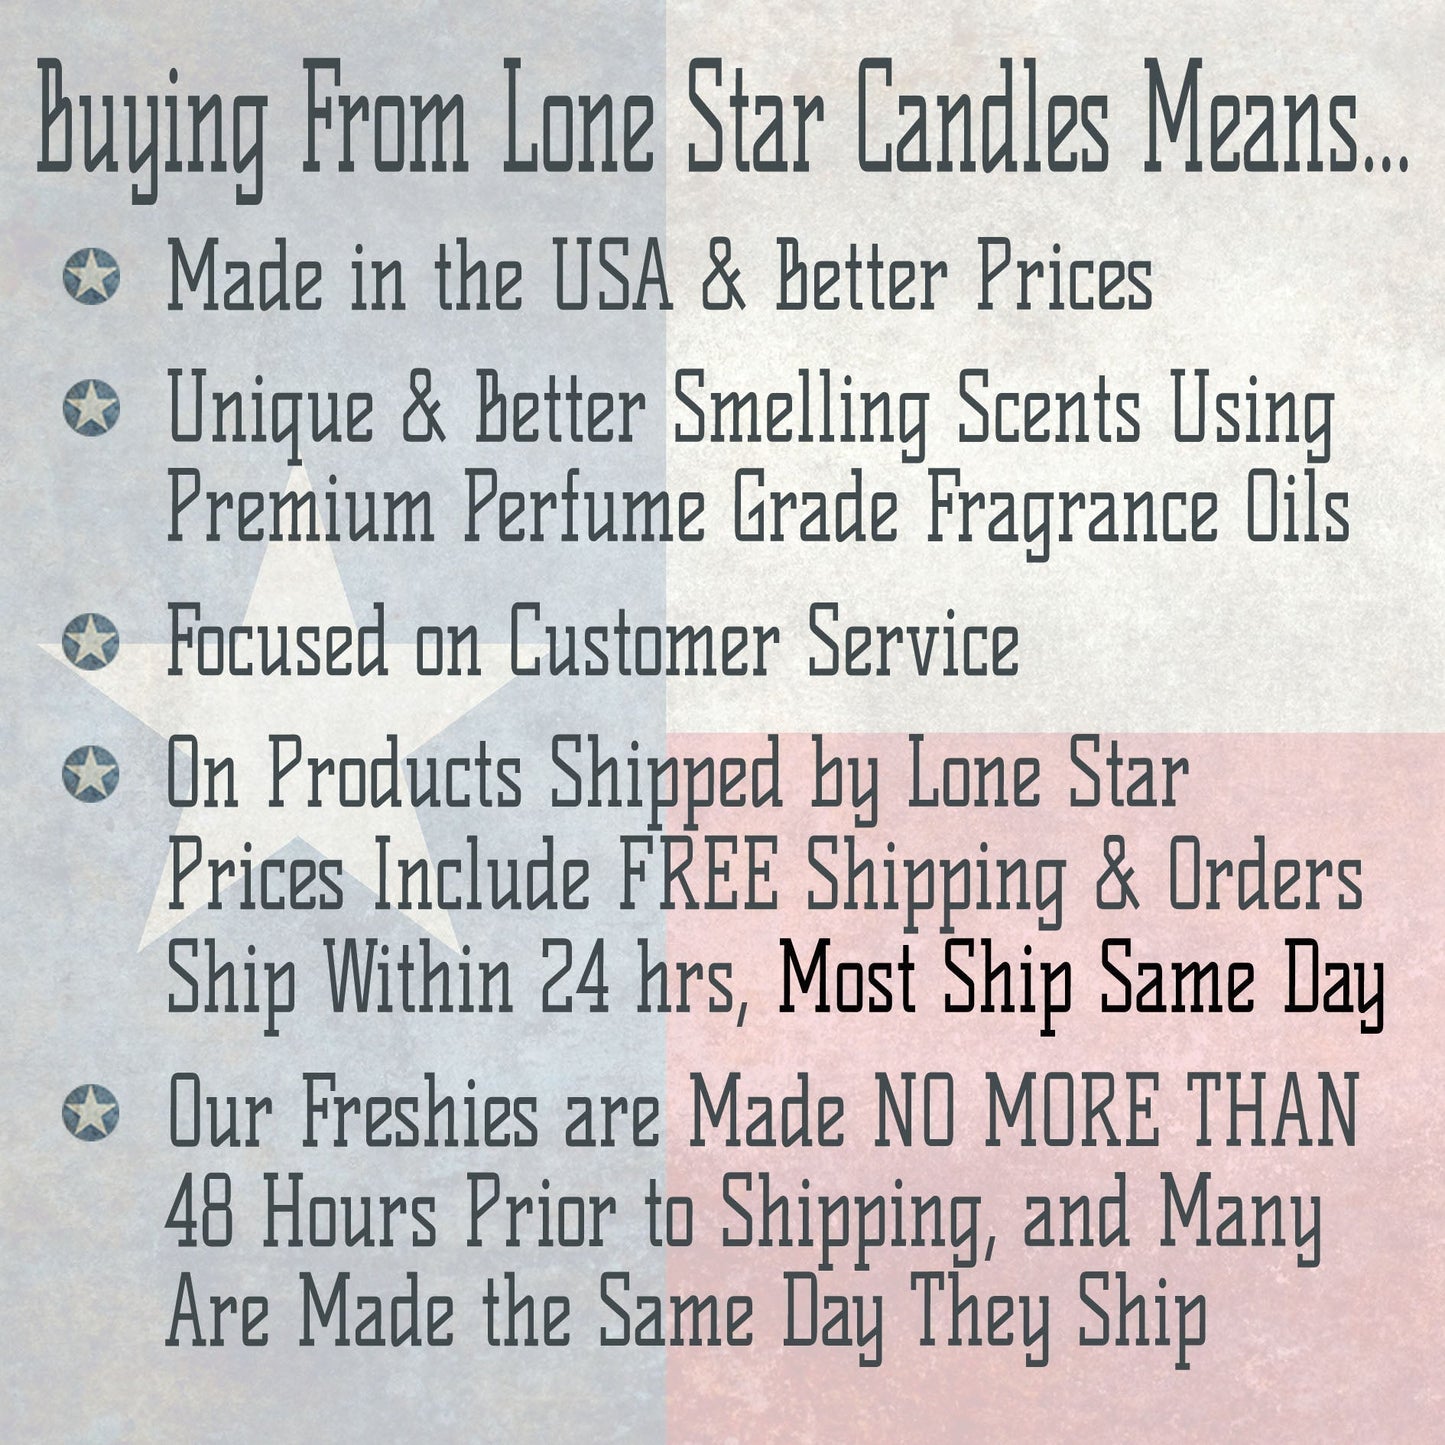 Leather, Lone Star Candles & More’s Premium Strongly Scented Freshies, Authentic Aroma of Genuine Leather, Car & Air Freshener, USA Made in Texas, B&W Llama 1-Pack